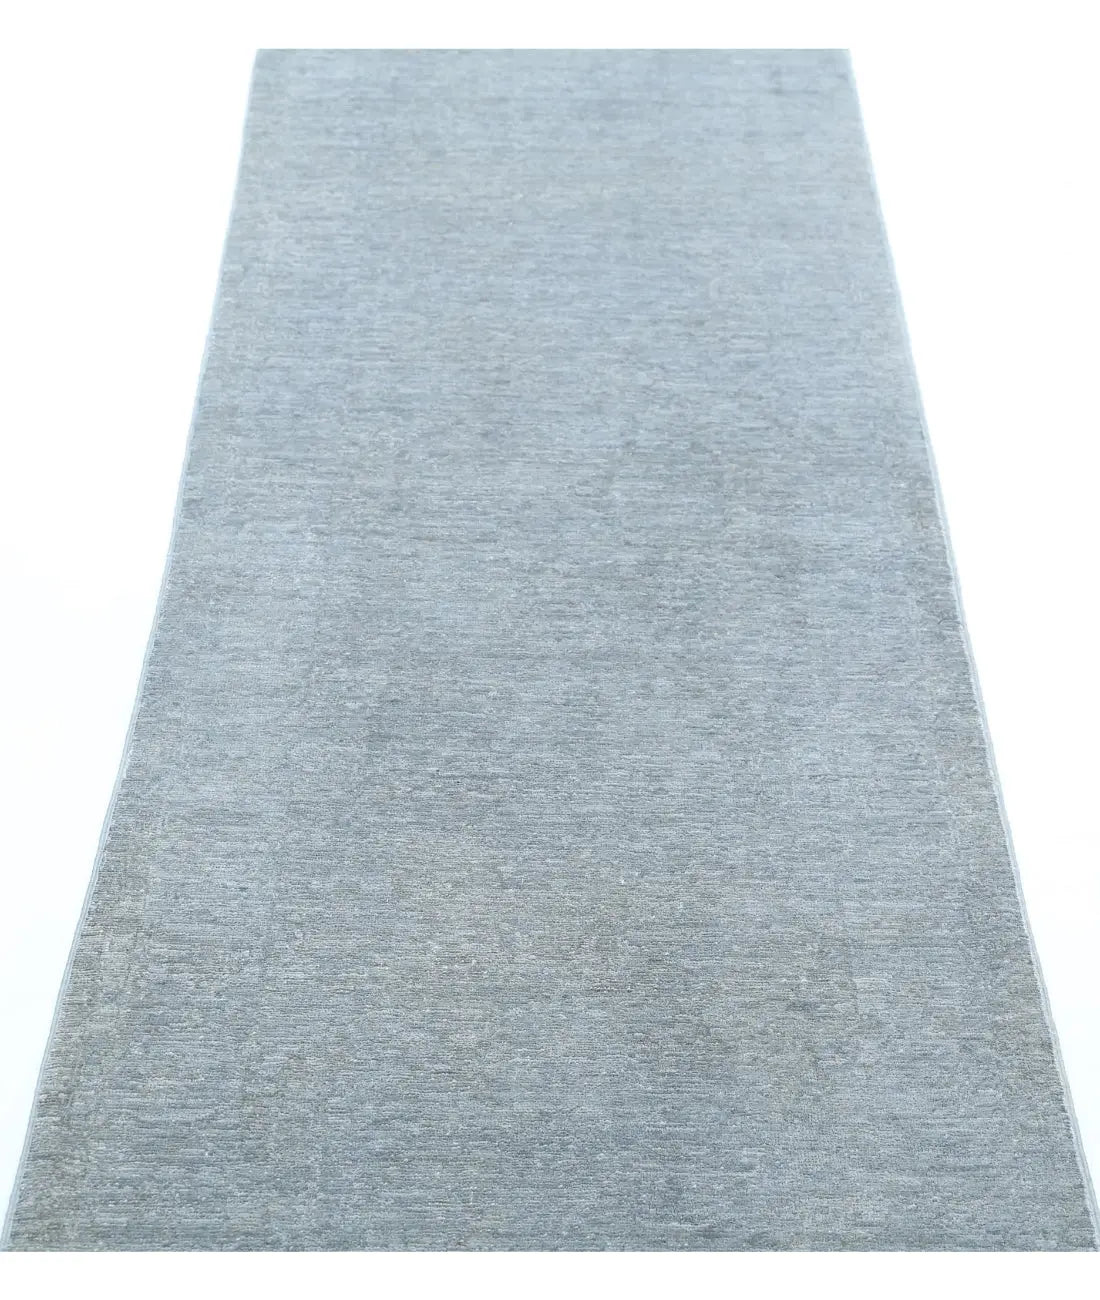 Hand Knotted Overdye Wool Rug - 2'3'' x 8'0''